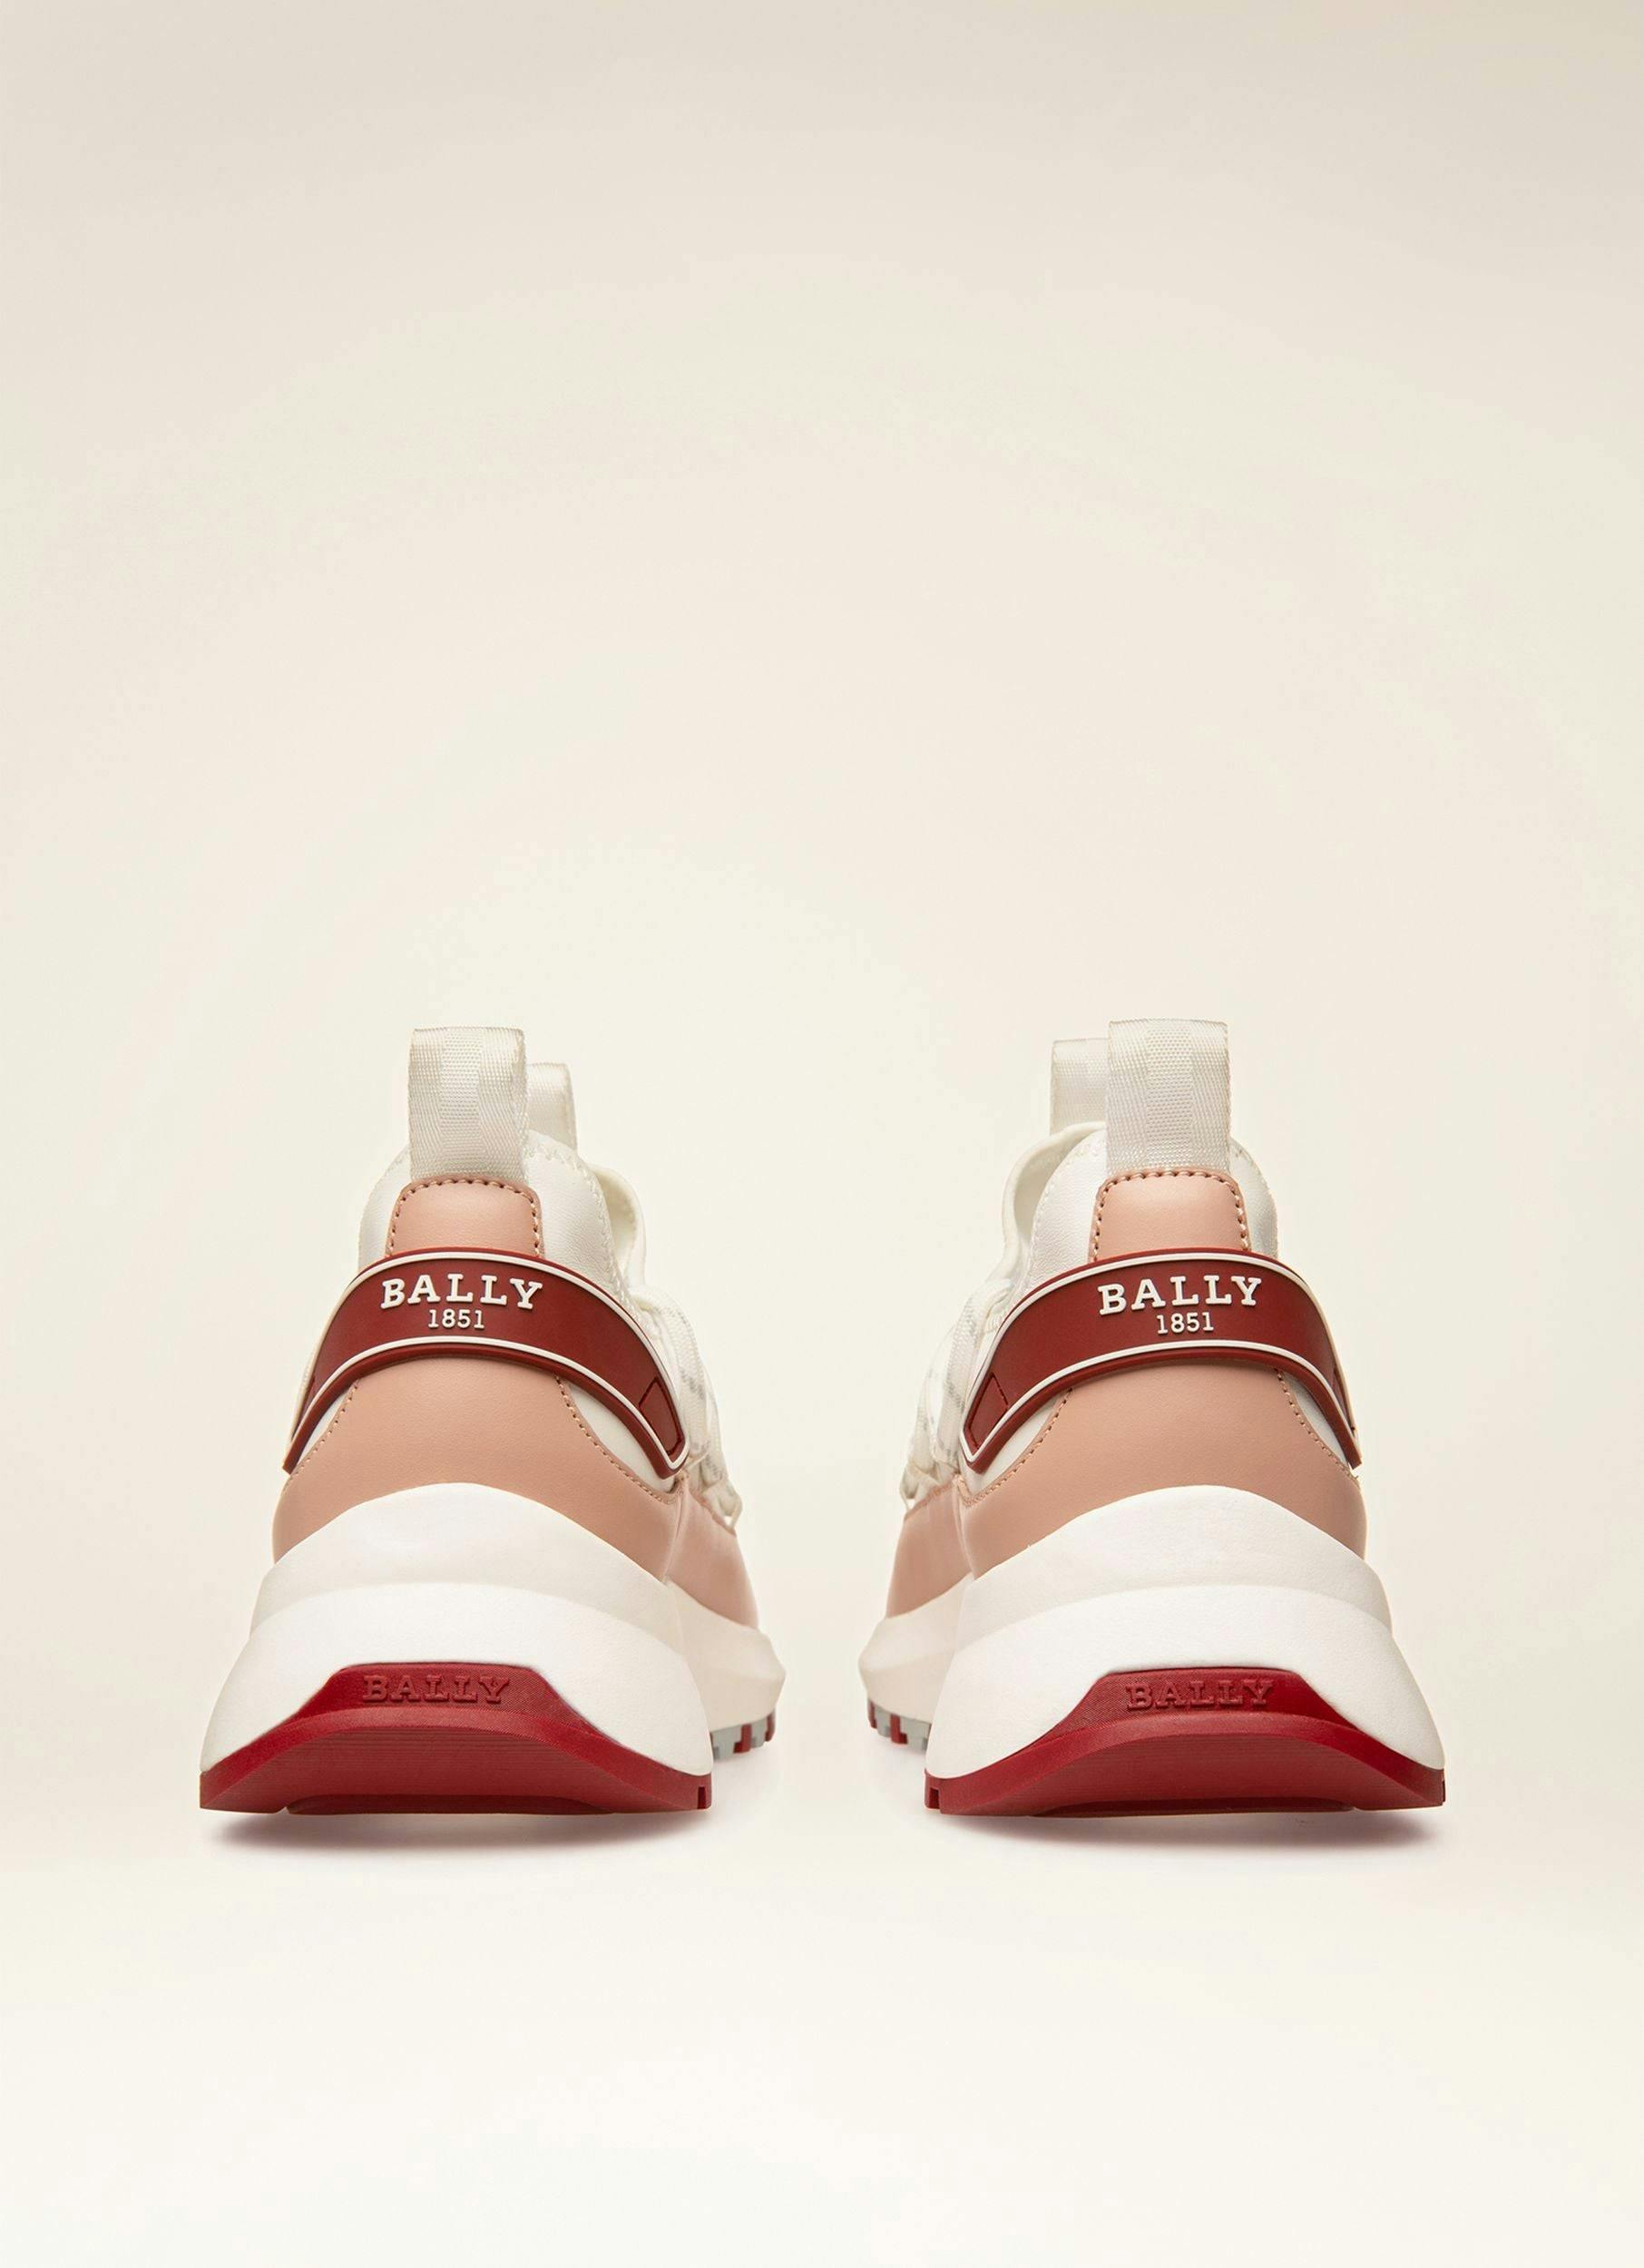 OUTLINE Leather Sneakers In White & Pink - Women's - Bally - 03